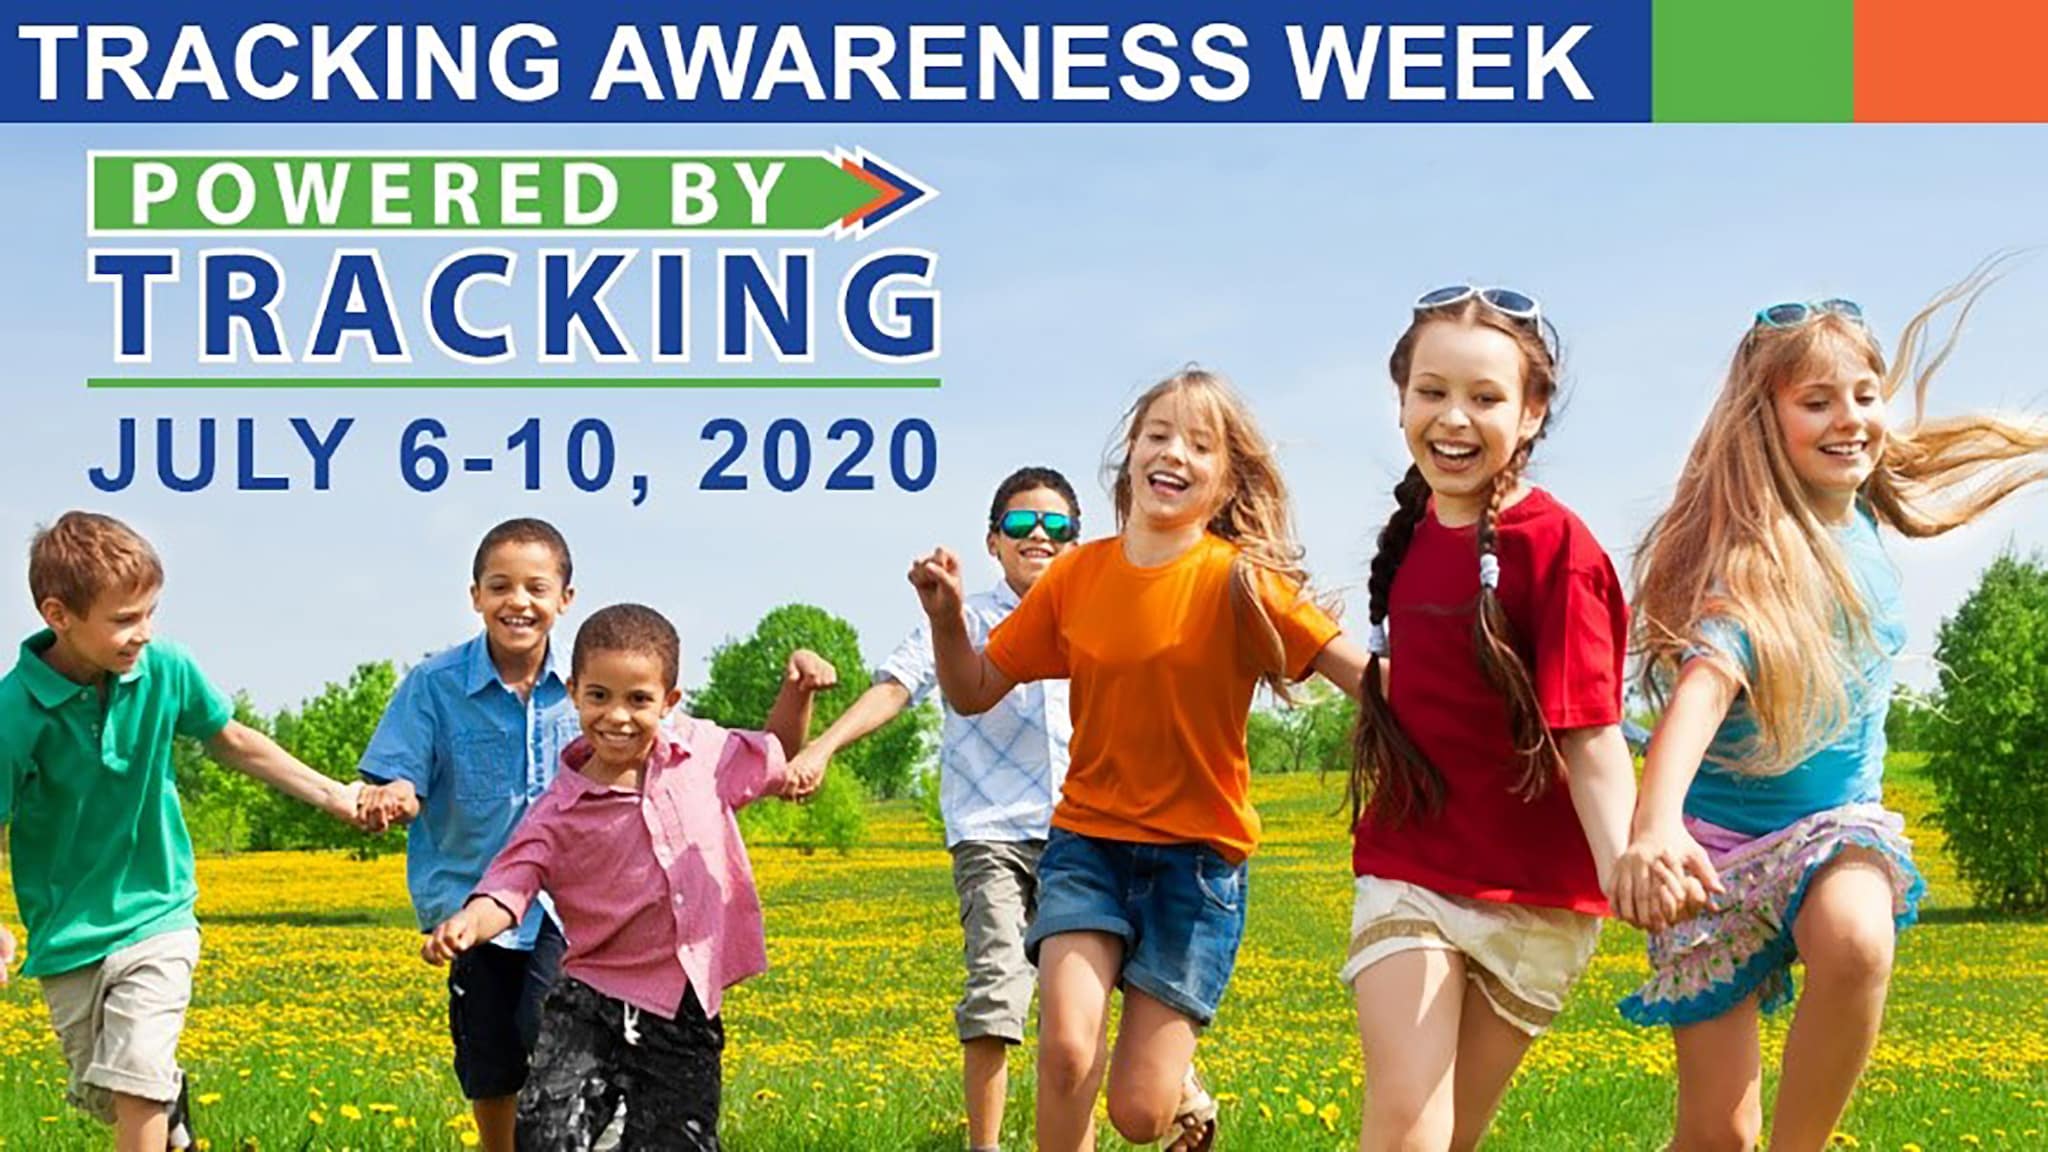 Tracking Awareness Week - Powered By Tracking | July 6-10, 2020 (seven girls and boys running together and laughing)